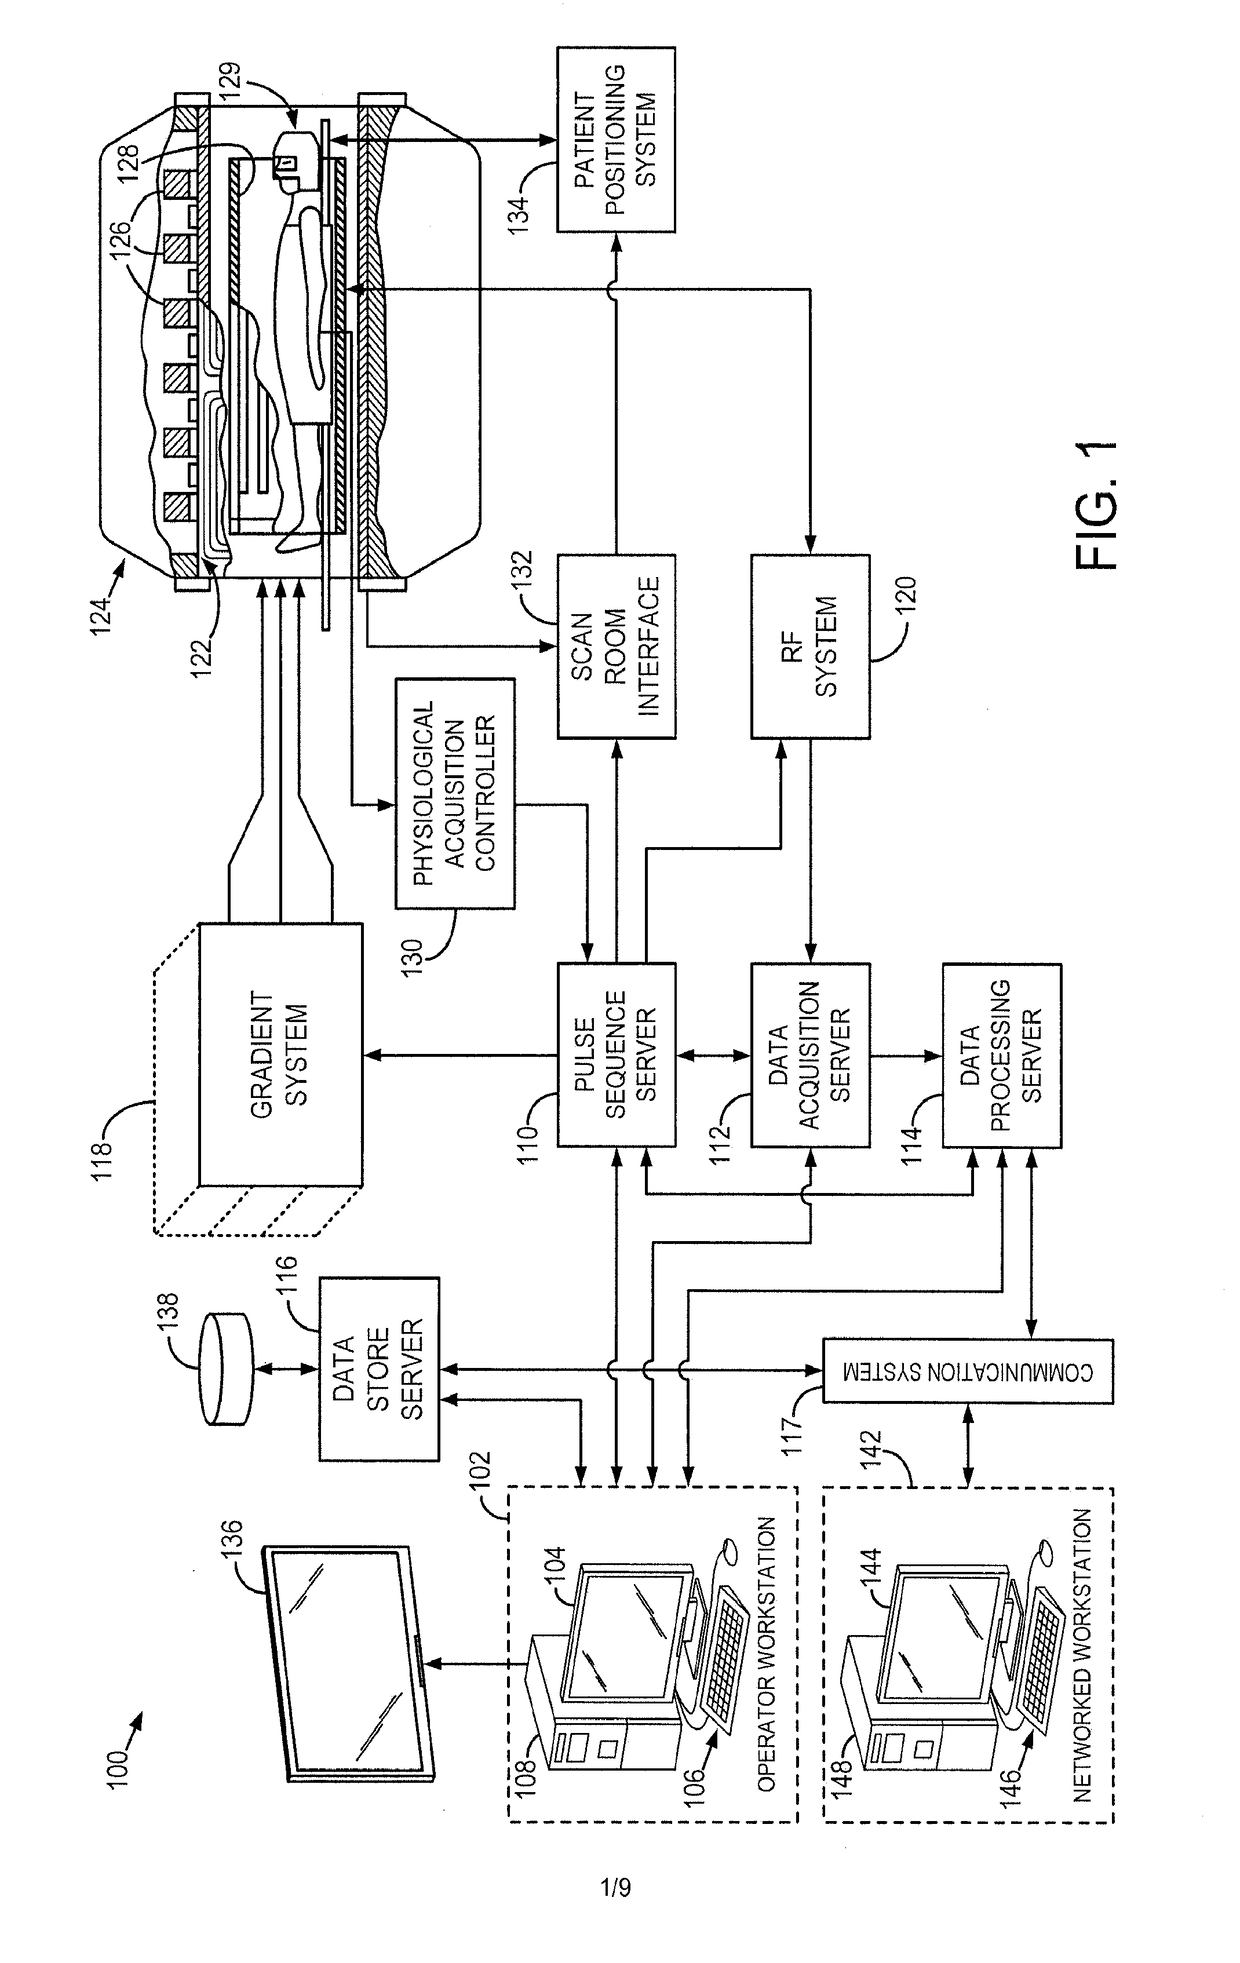 System and method for low-field, multi-channel imaging